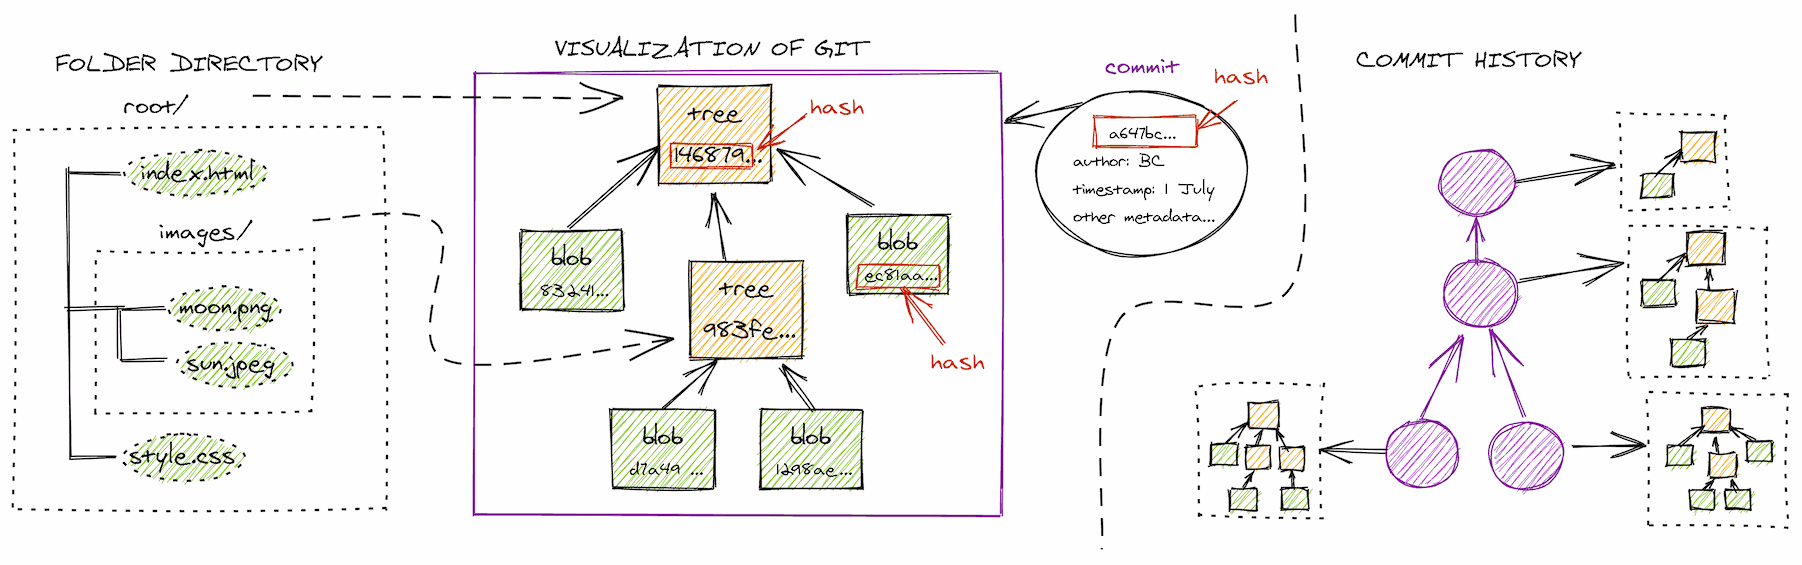 Blobs, Trees, Commits, Hash in one picture